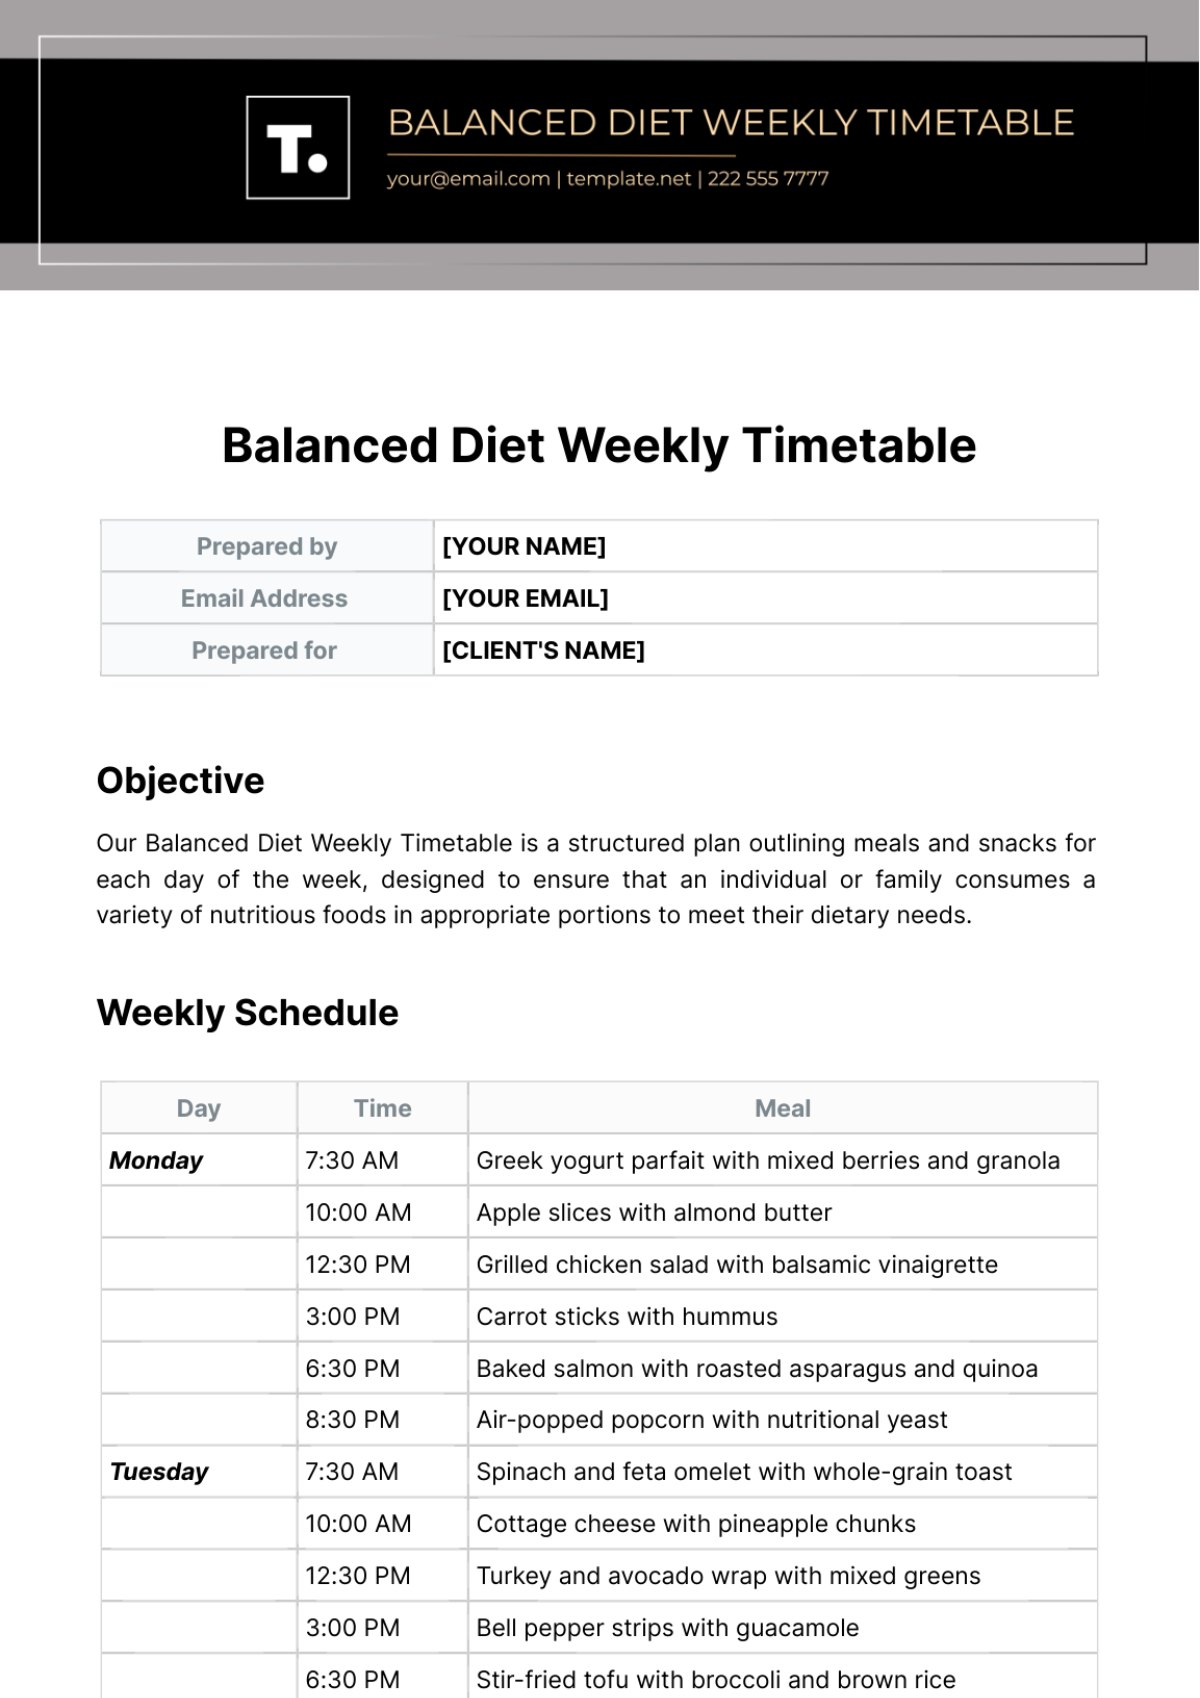 Free Balanced Diet Weekly Timetable Template